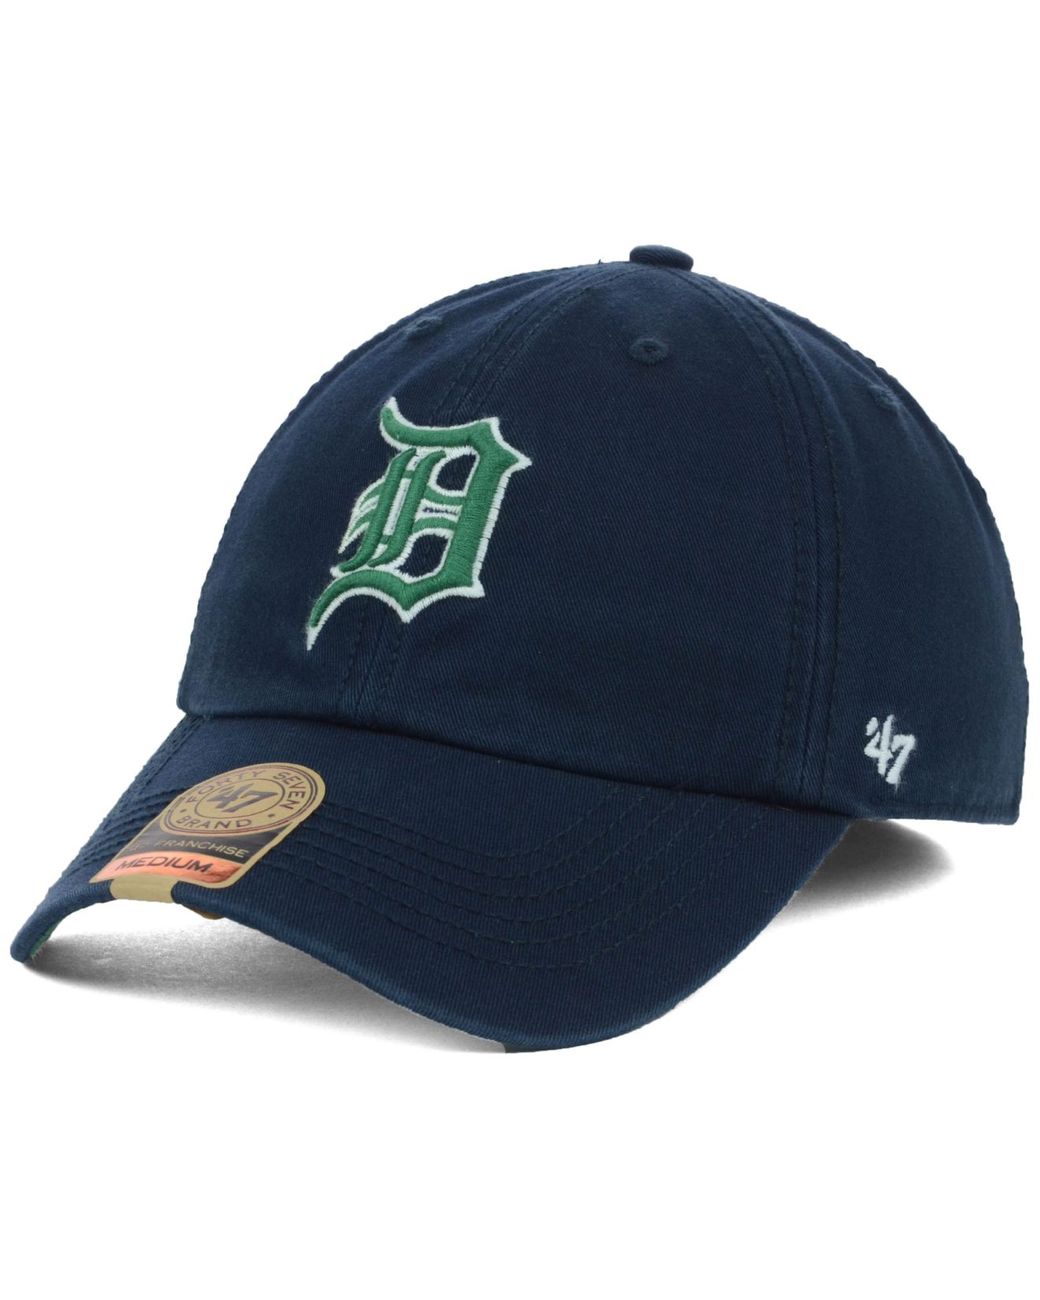 Mens 47 Navy Detroit Tigers Team Franchise Fitted India